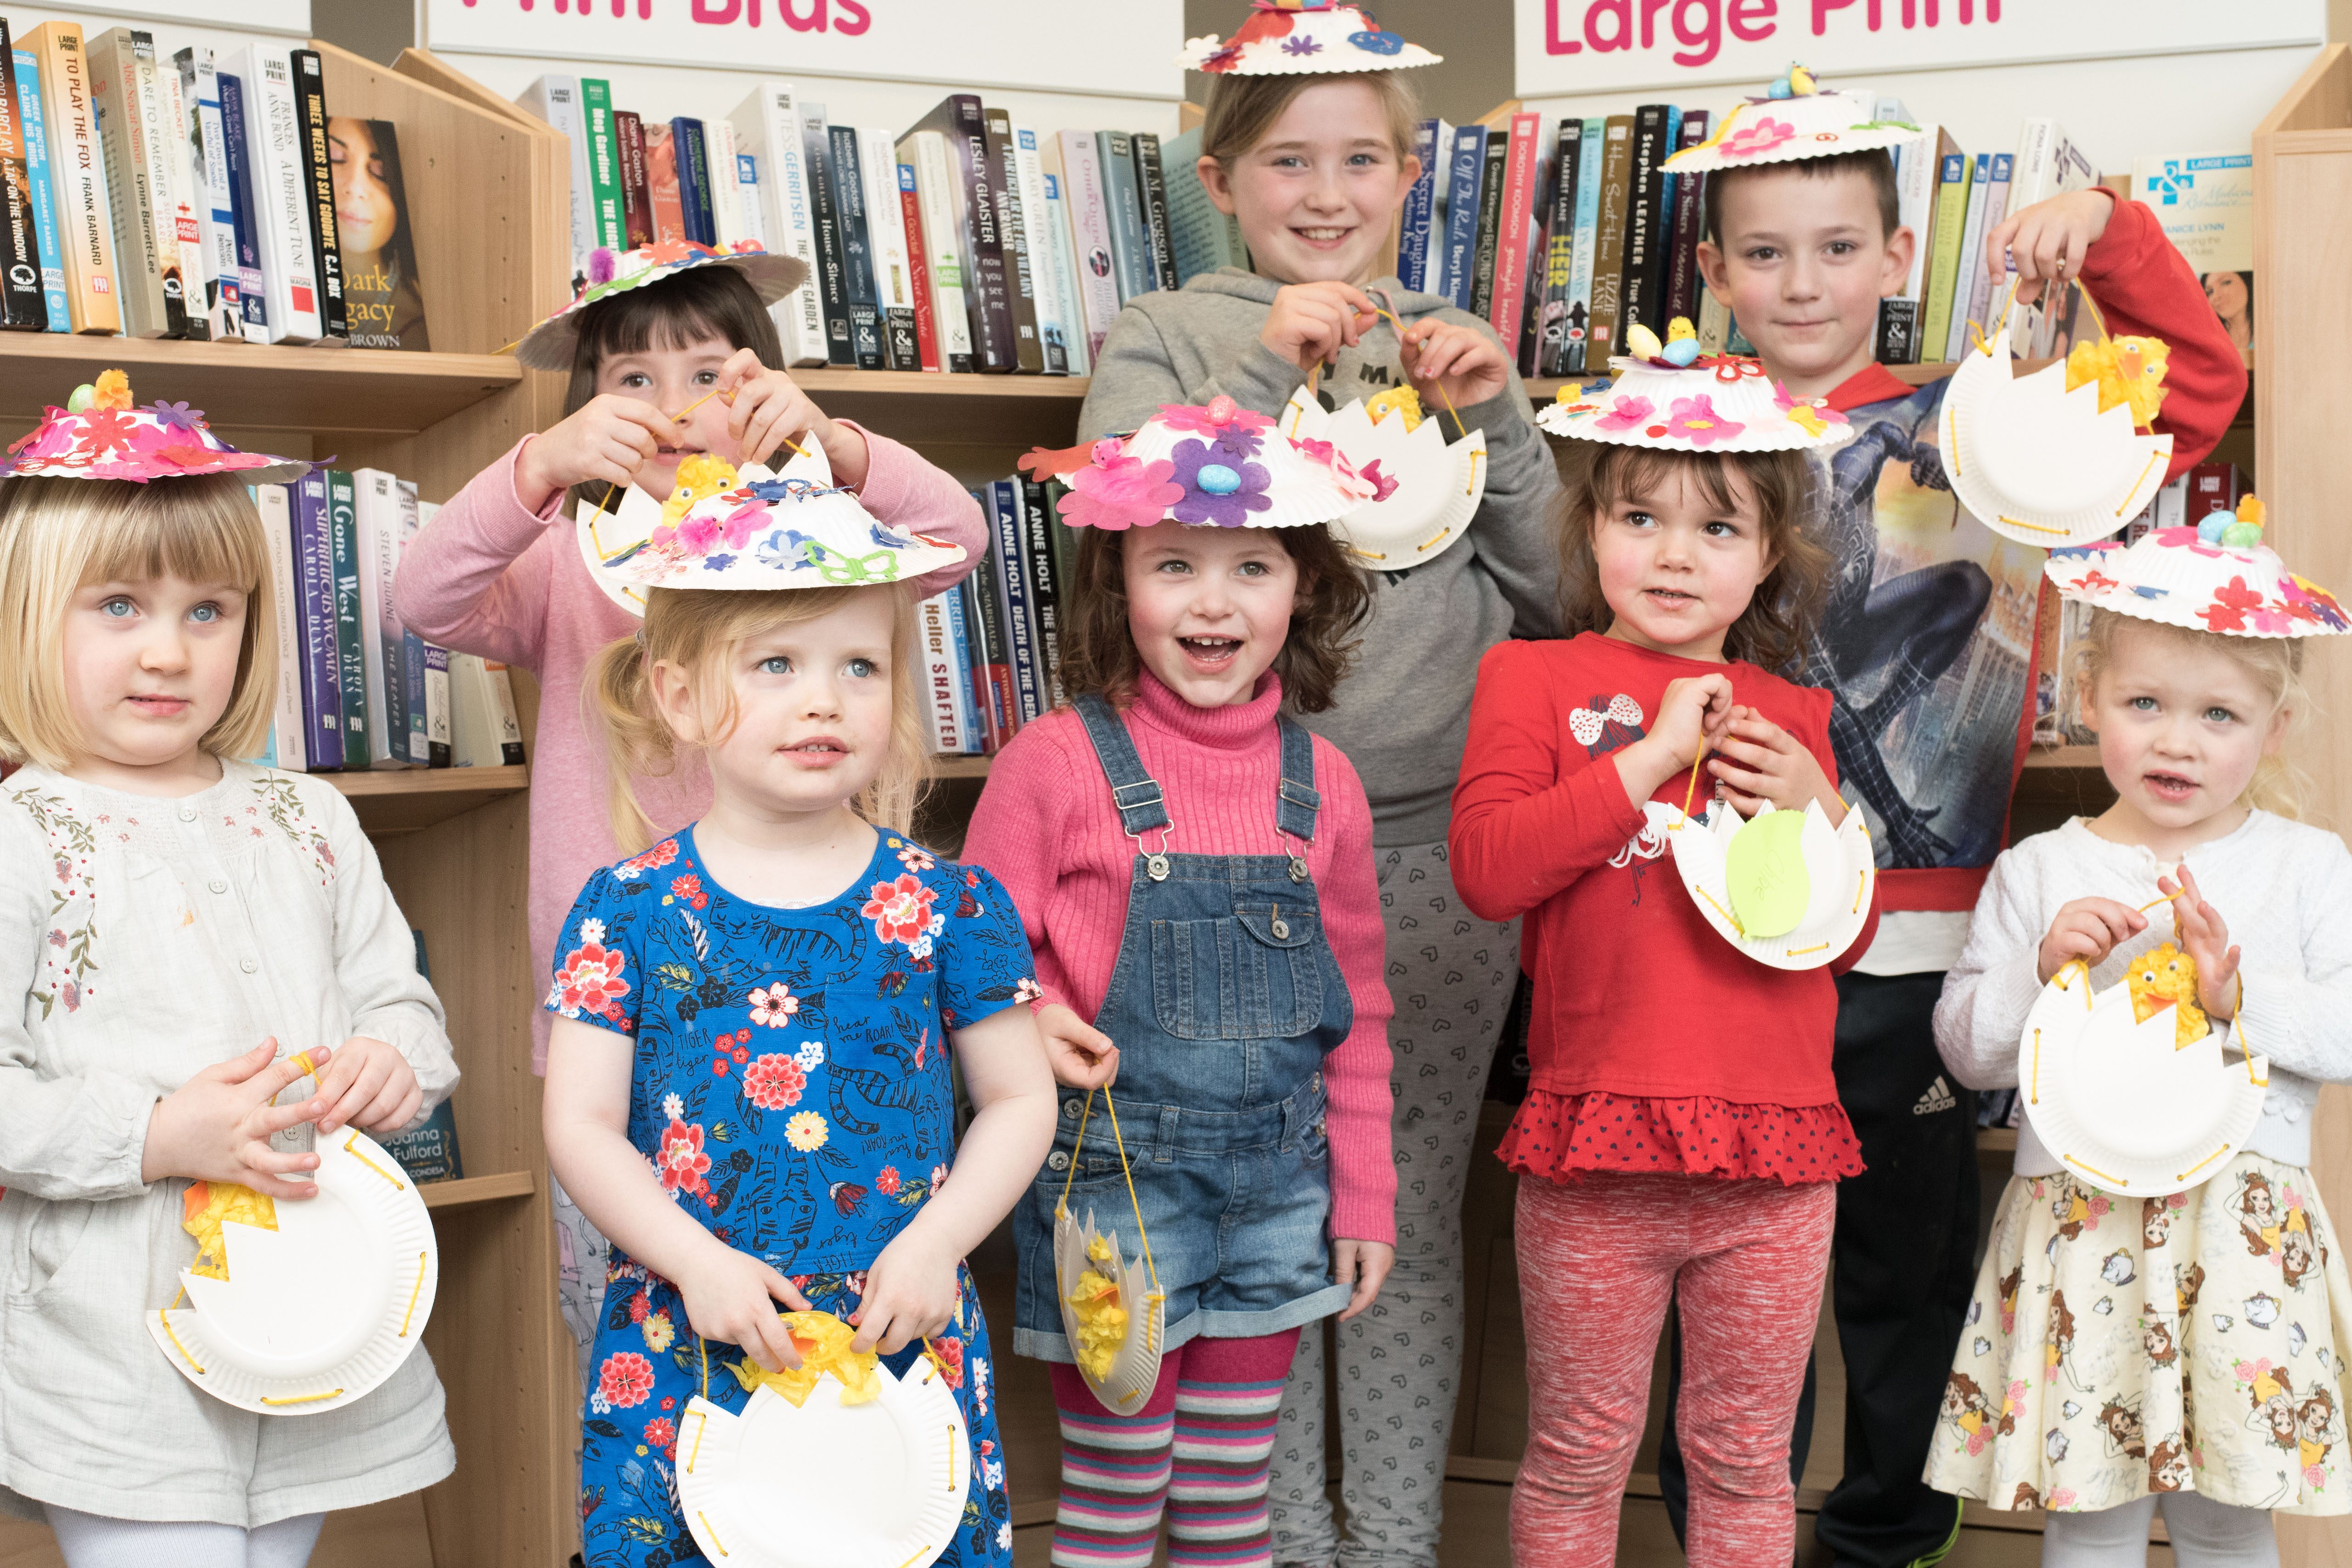 Don’t think libraries are for you? Chirk Library want to prove you wrong!